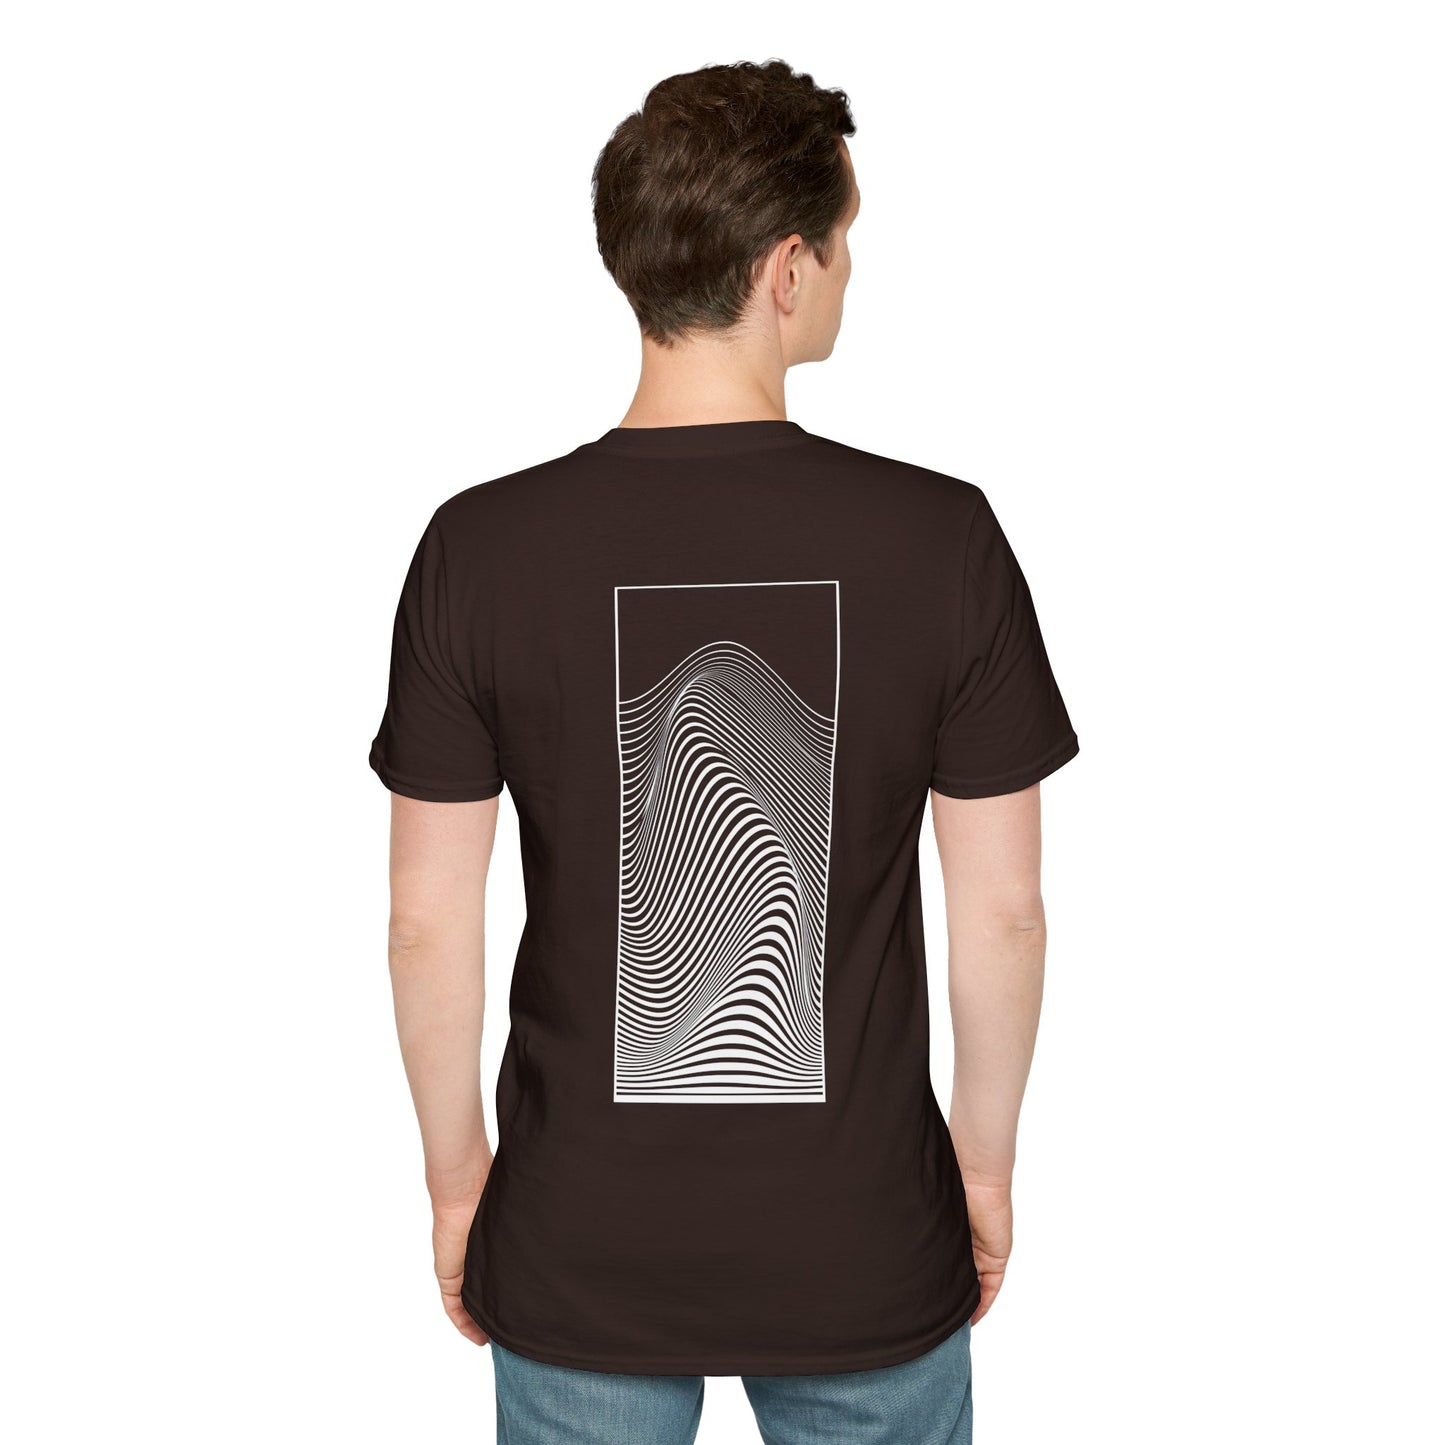 Brown T-shirt with a black and white optical illusion design of swirling patterns